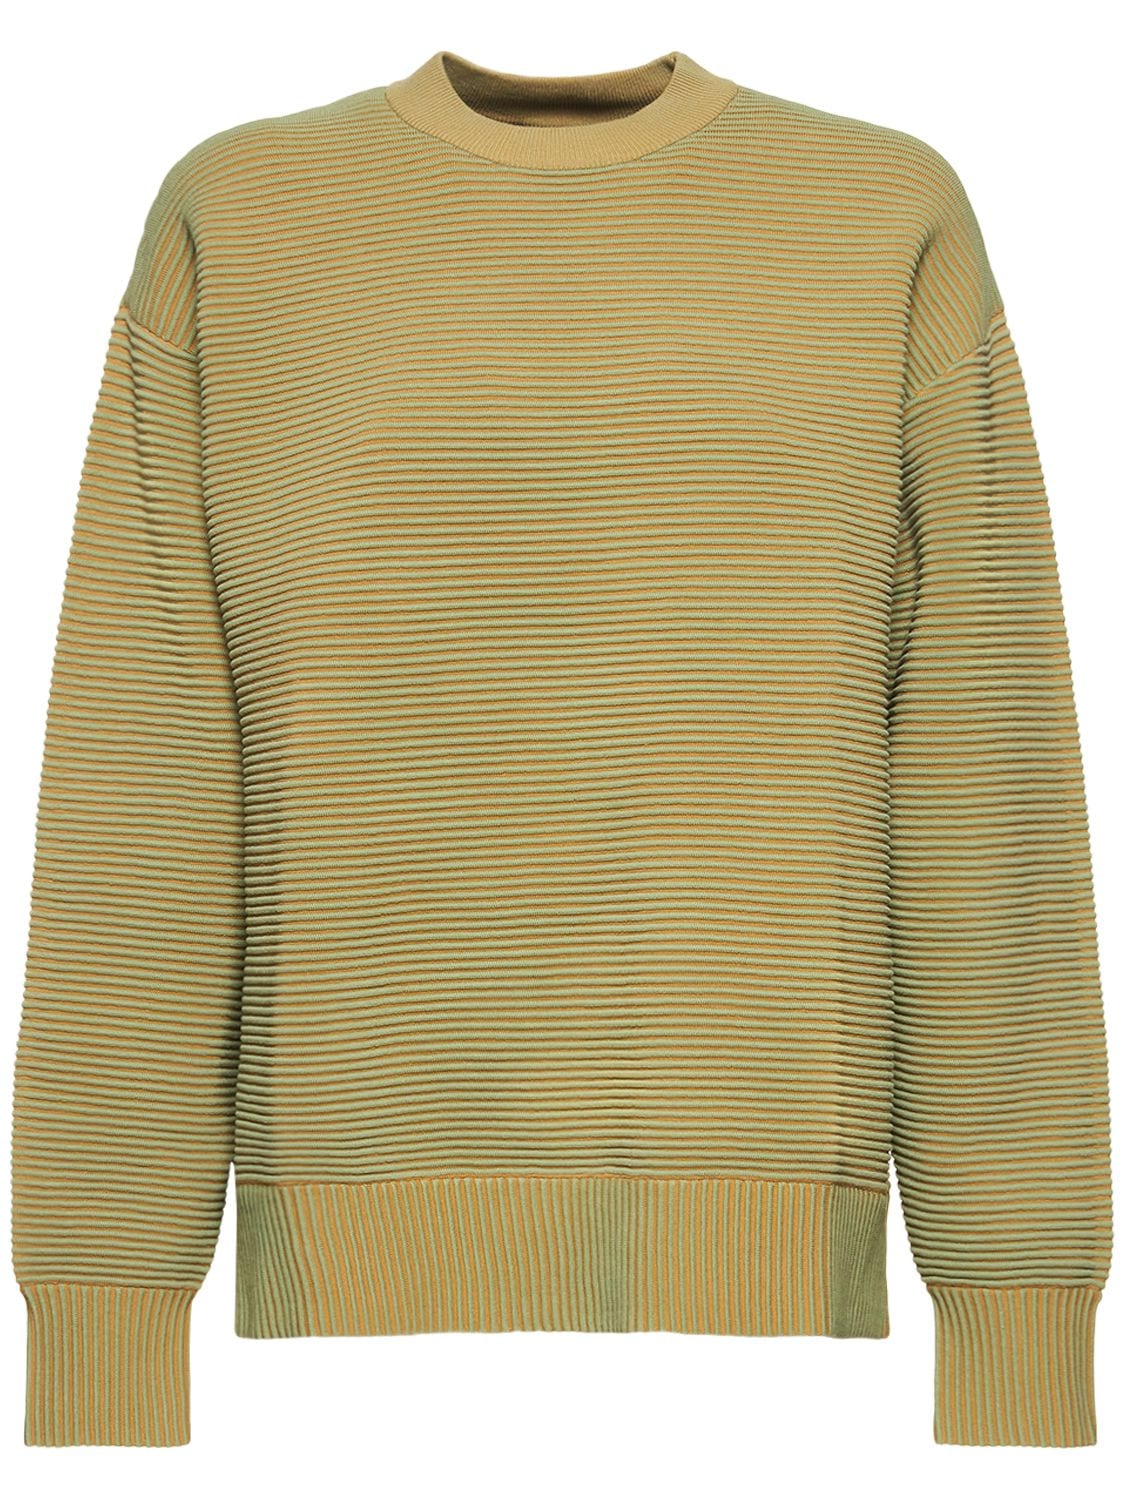 Image of Sonny Cotton Knit Sweater